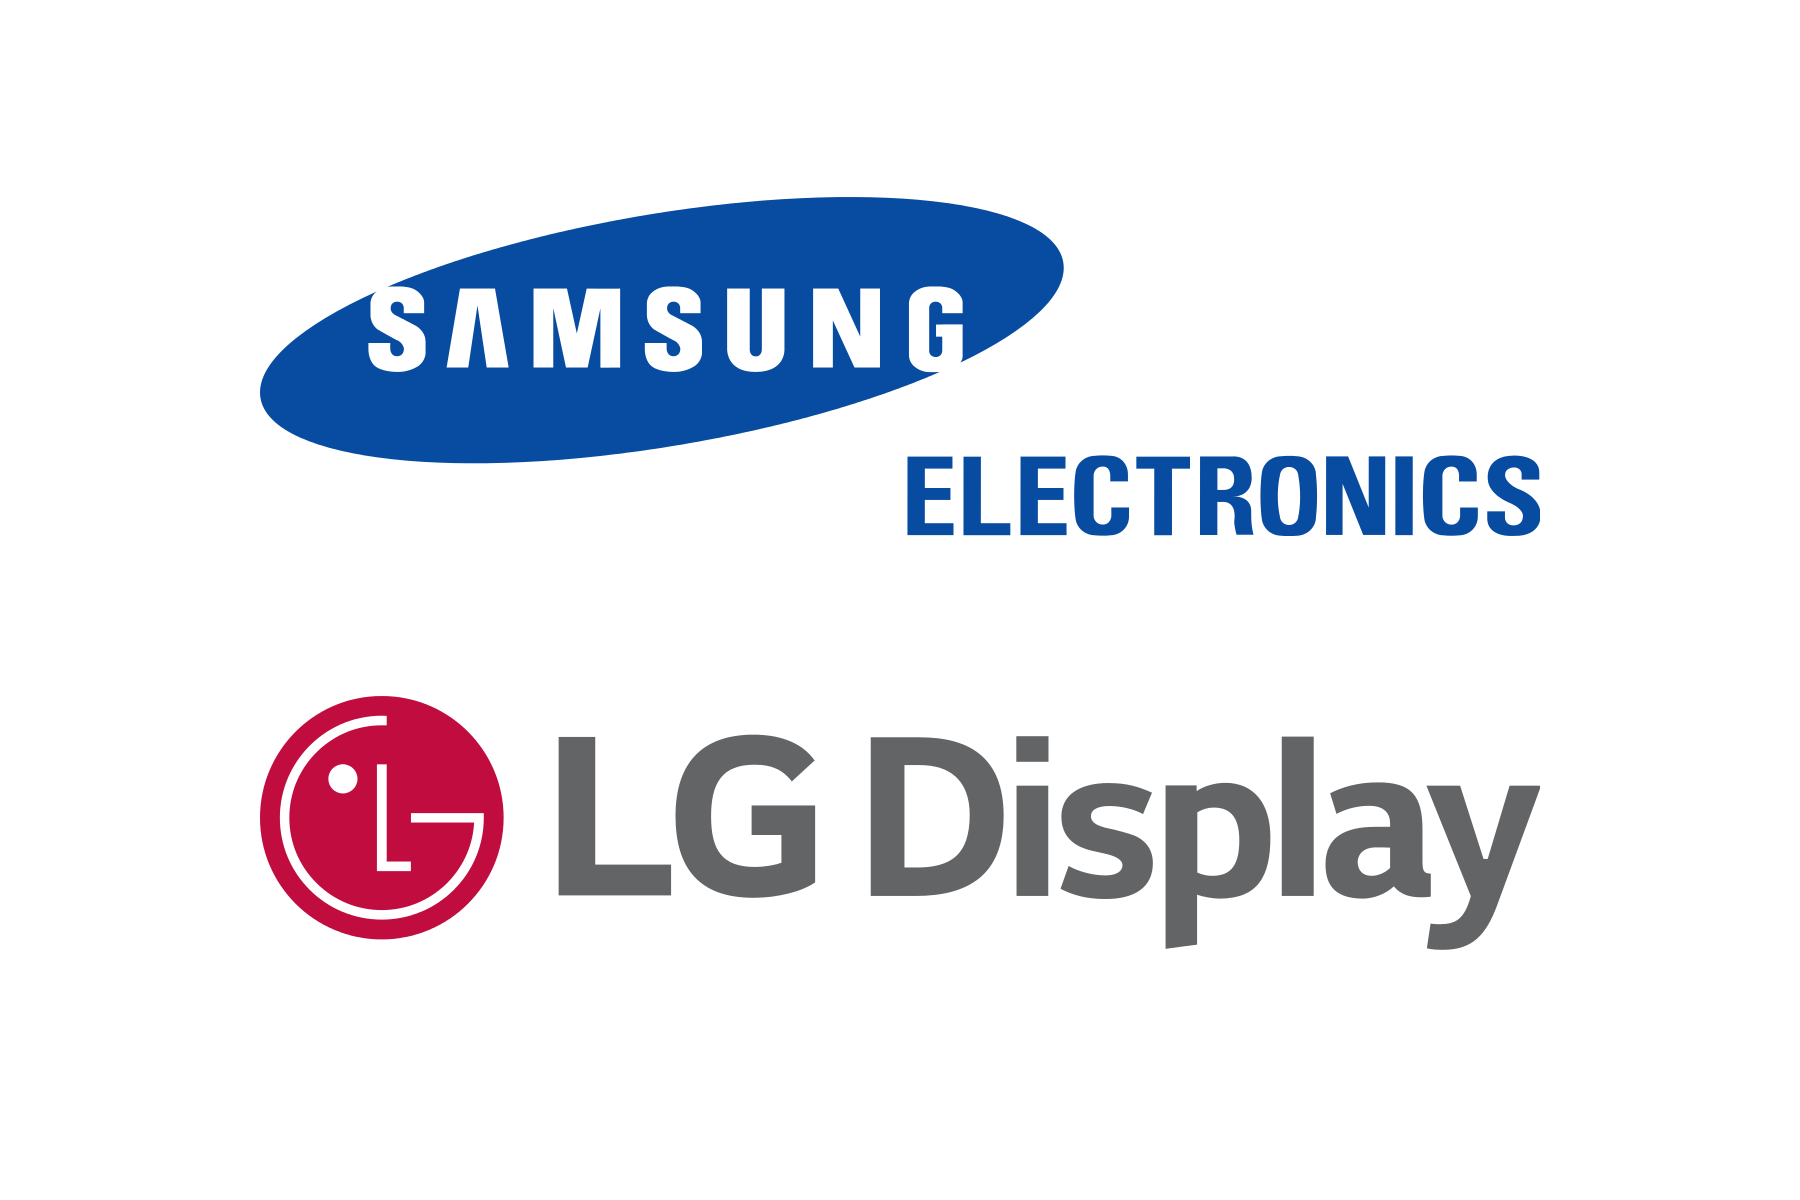 Supplied products to Samsung Electronics and LG Display’s new plant